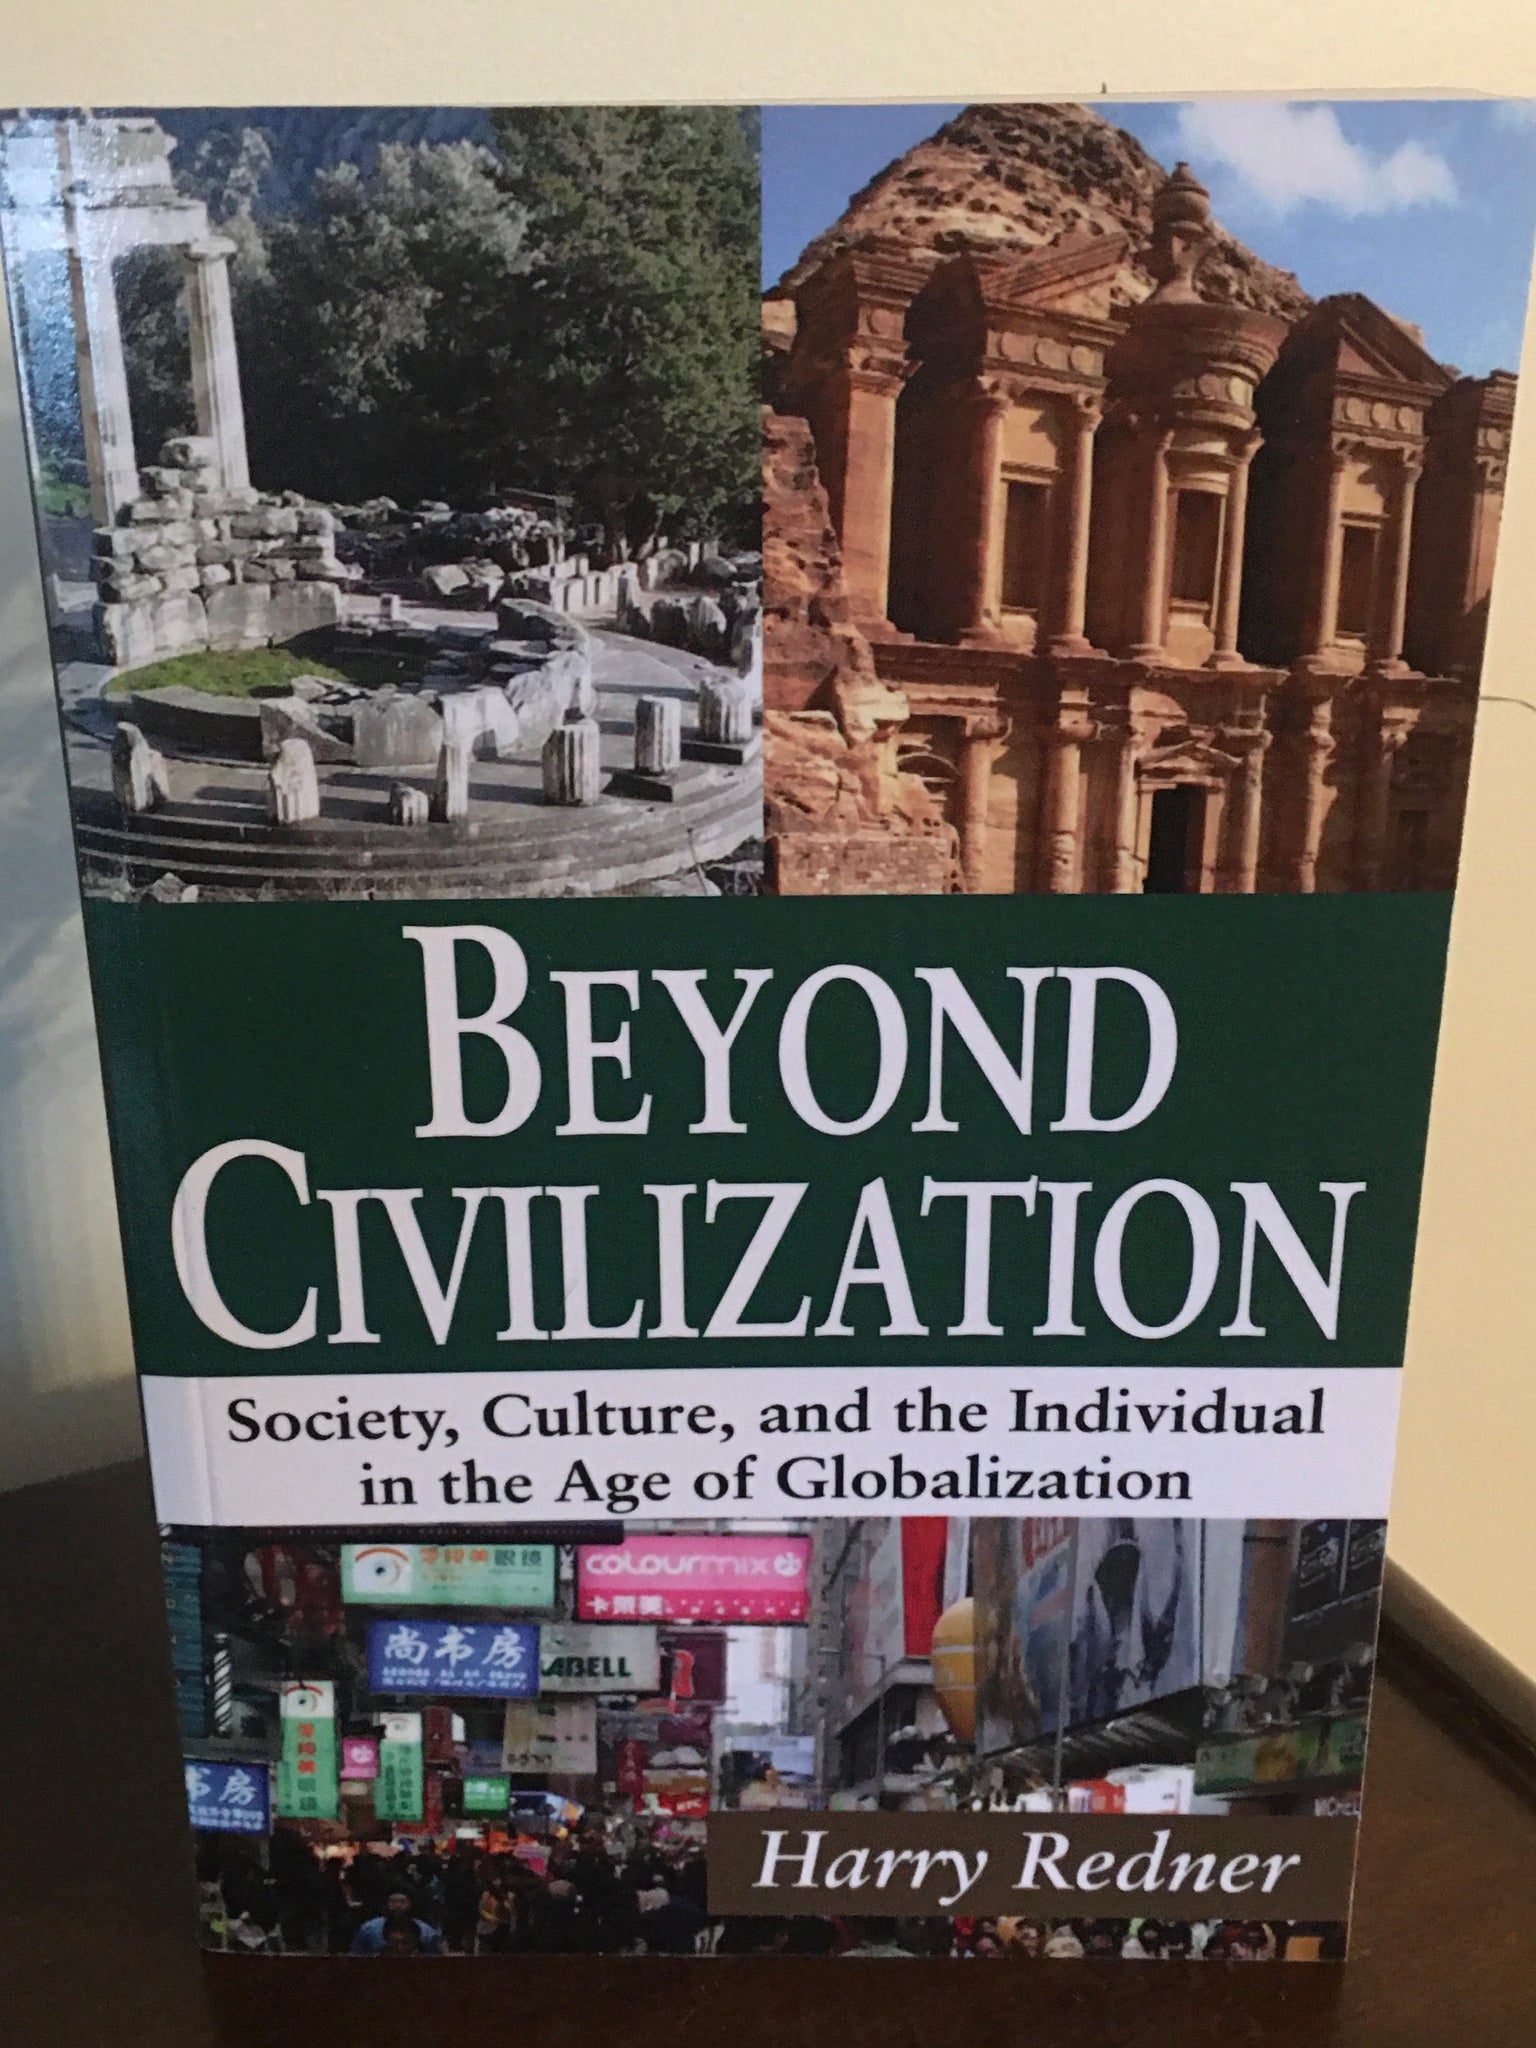 Beyond Civilization    Society, Culture and the Individual in the Age of Globalization